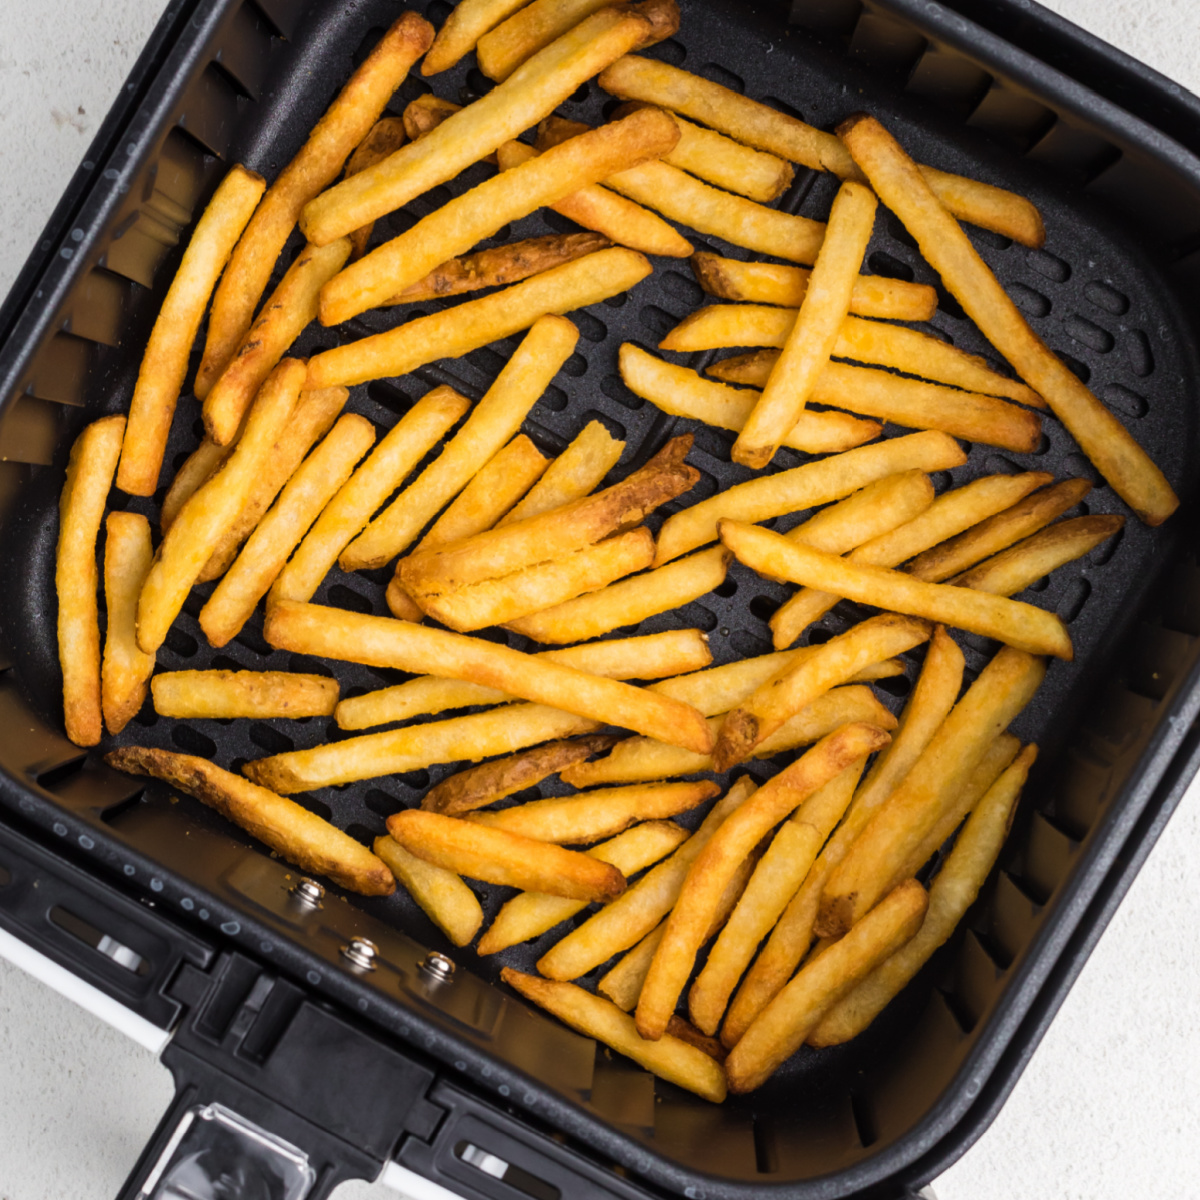 Air Fried French fries in the basket of the air fryer.